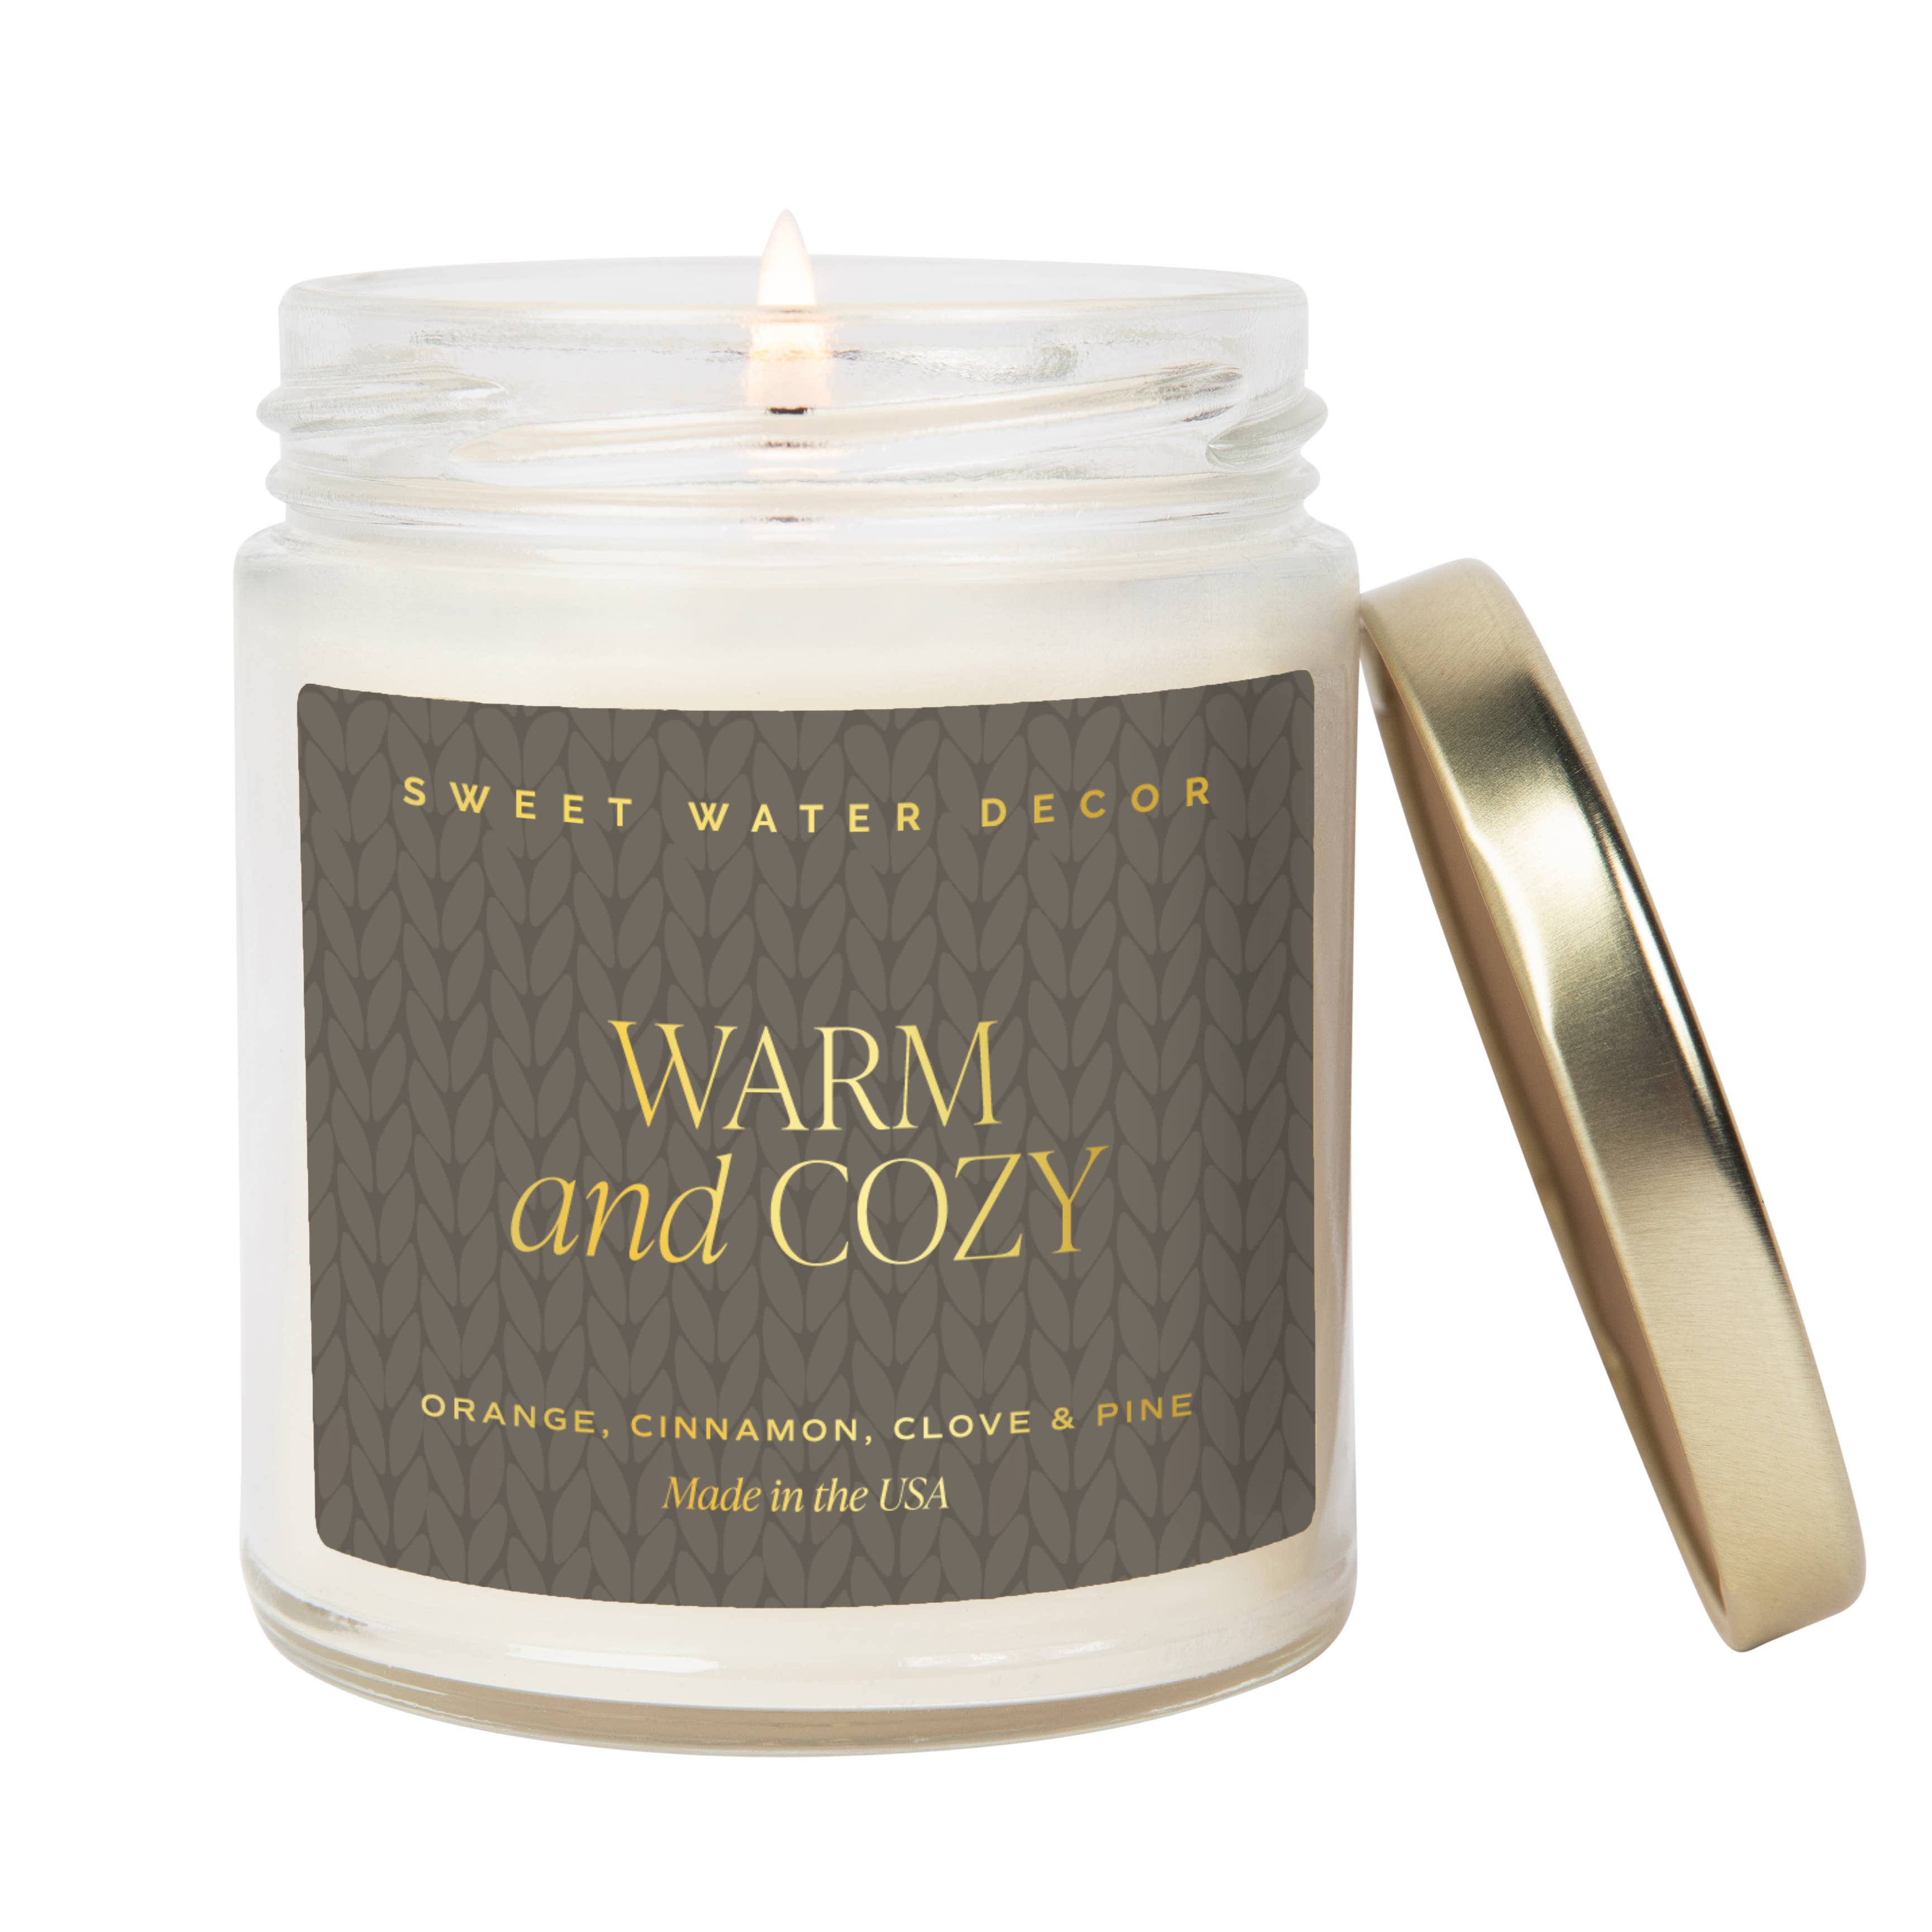 Warm and Cozy 9 oz Soy Candle - Home Decor & Gifts